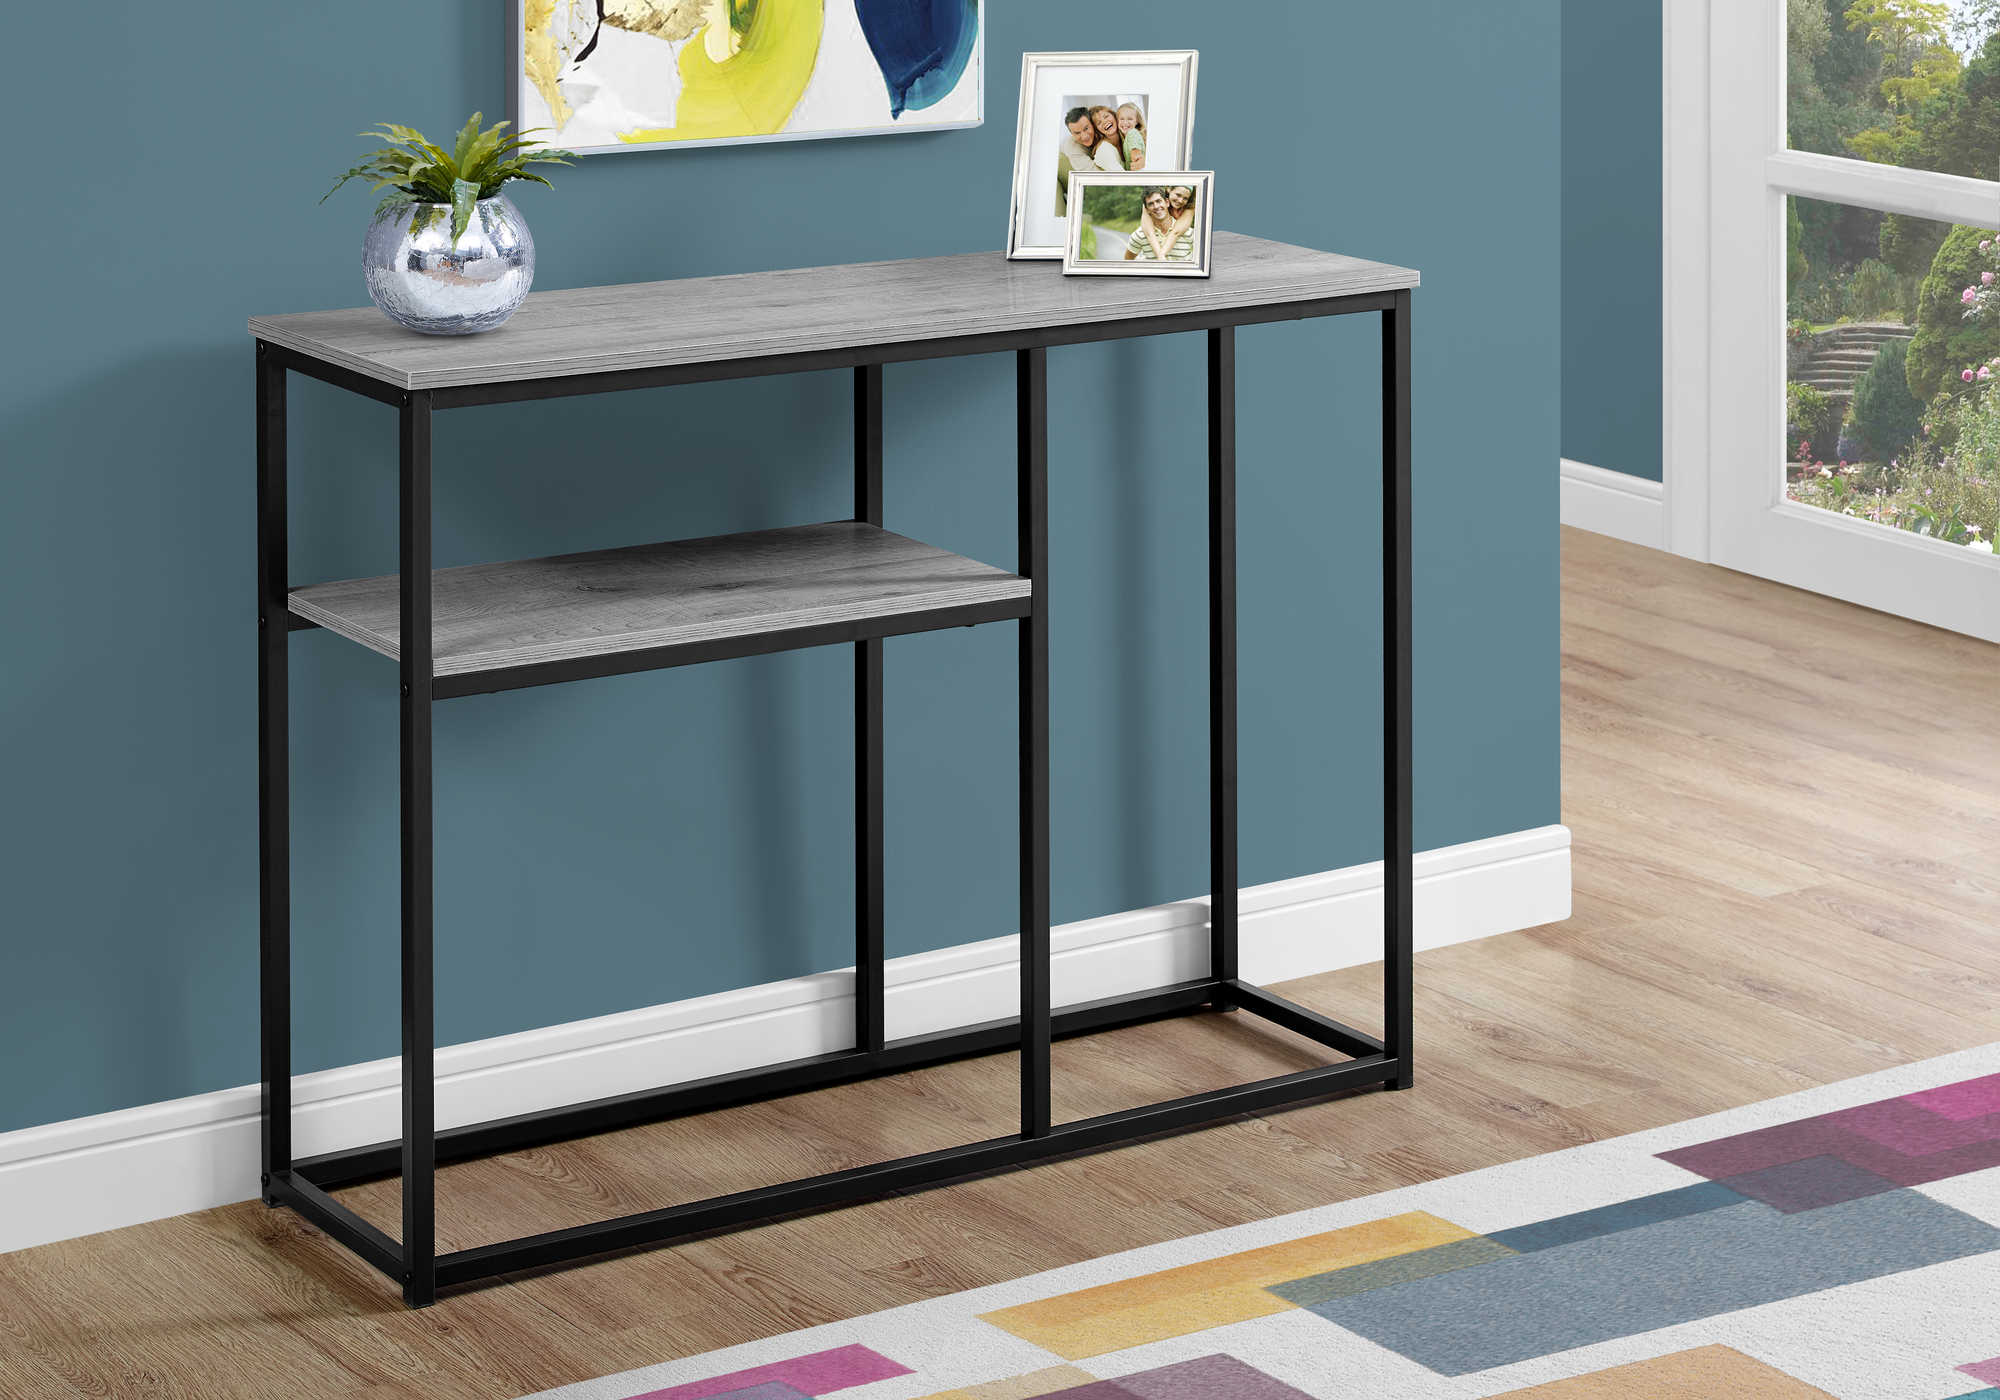 BEDROOM ACCENT CONSOLE TABLE - 42"L / GREY / BLACK METAL HALL CONSOLE